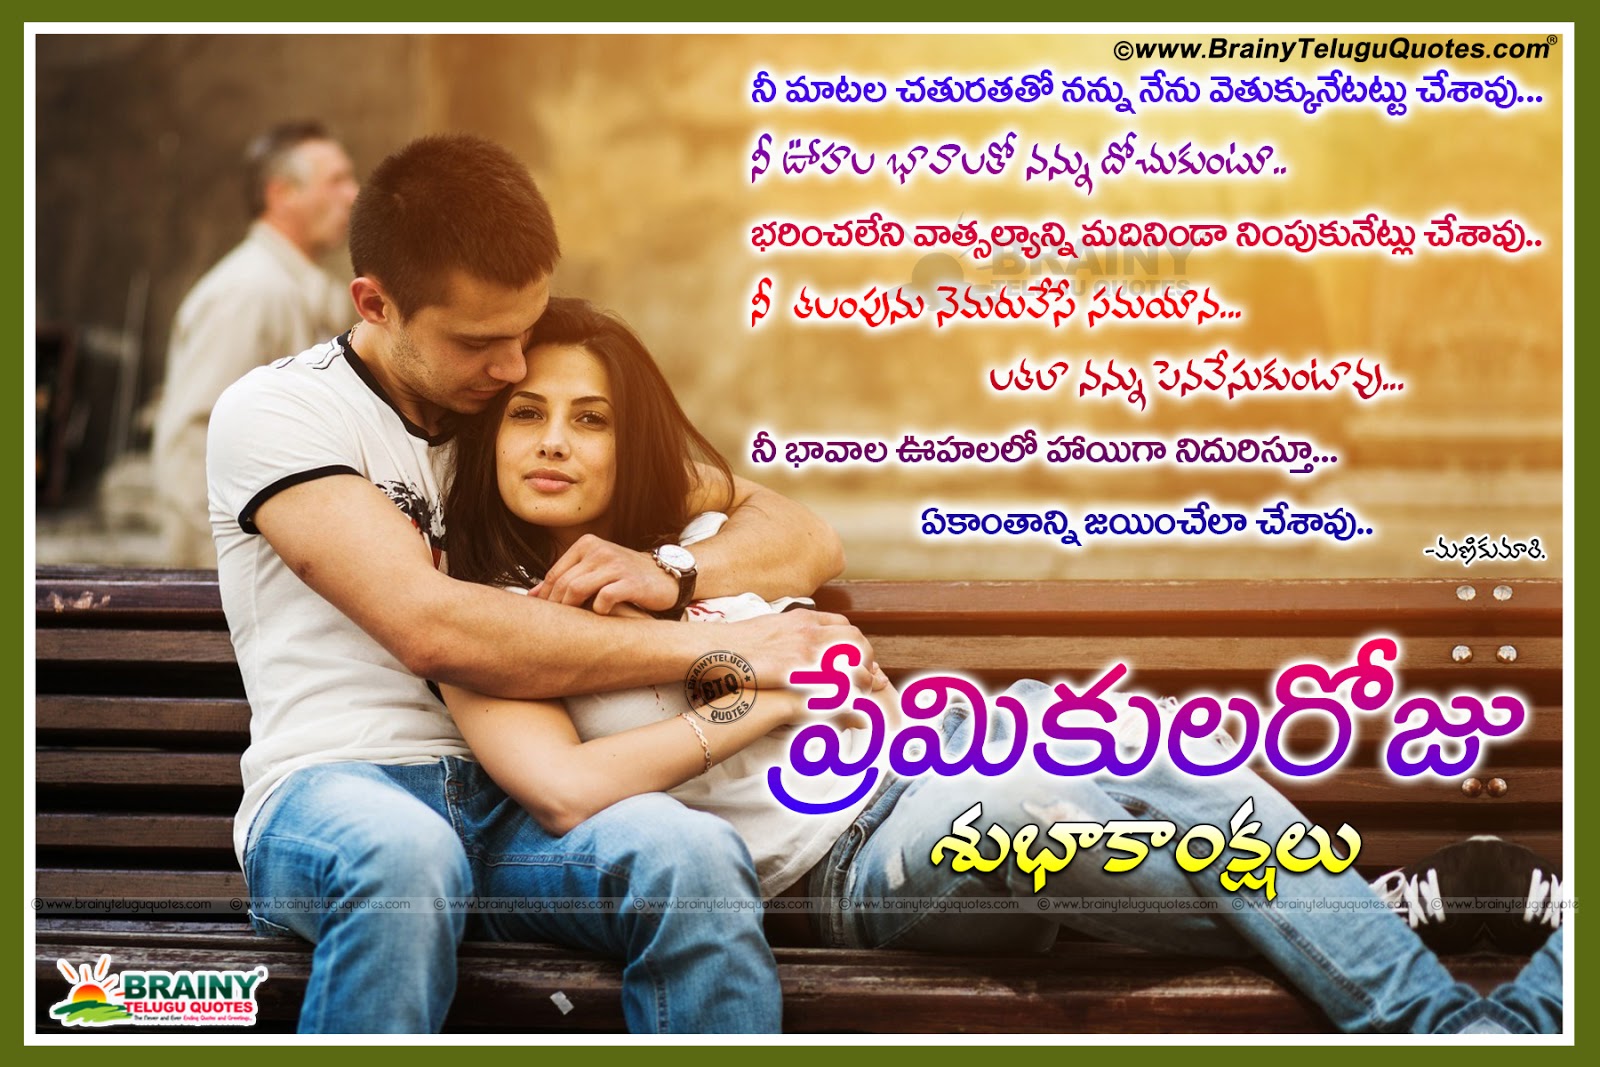 200 Valentine’s Day Wishes, Love Poems and Cards kavithalu in Telugu ...